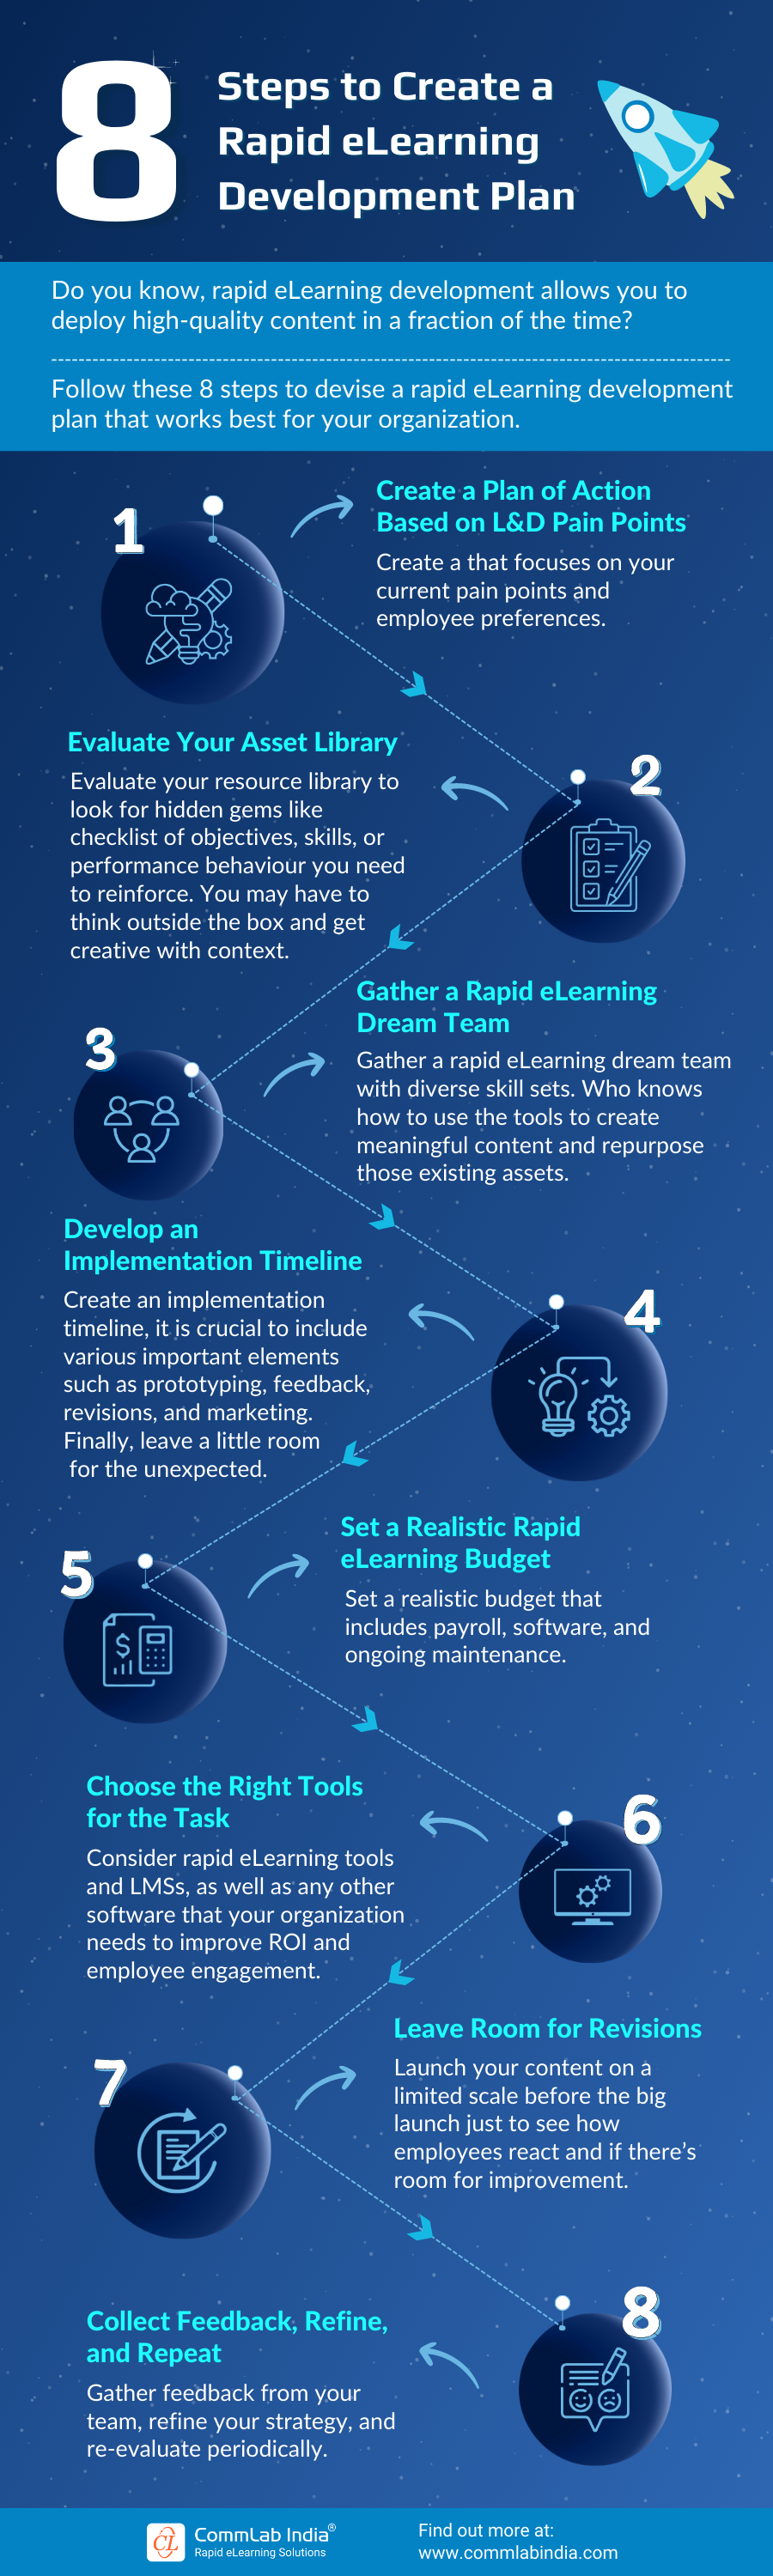 Steps to Implement Rapid eLearning